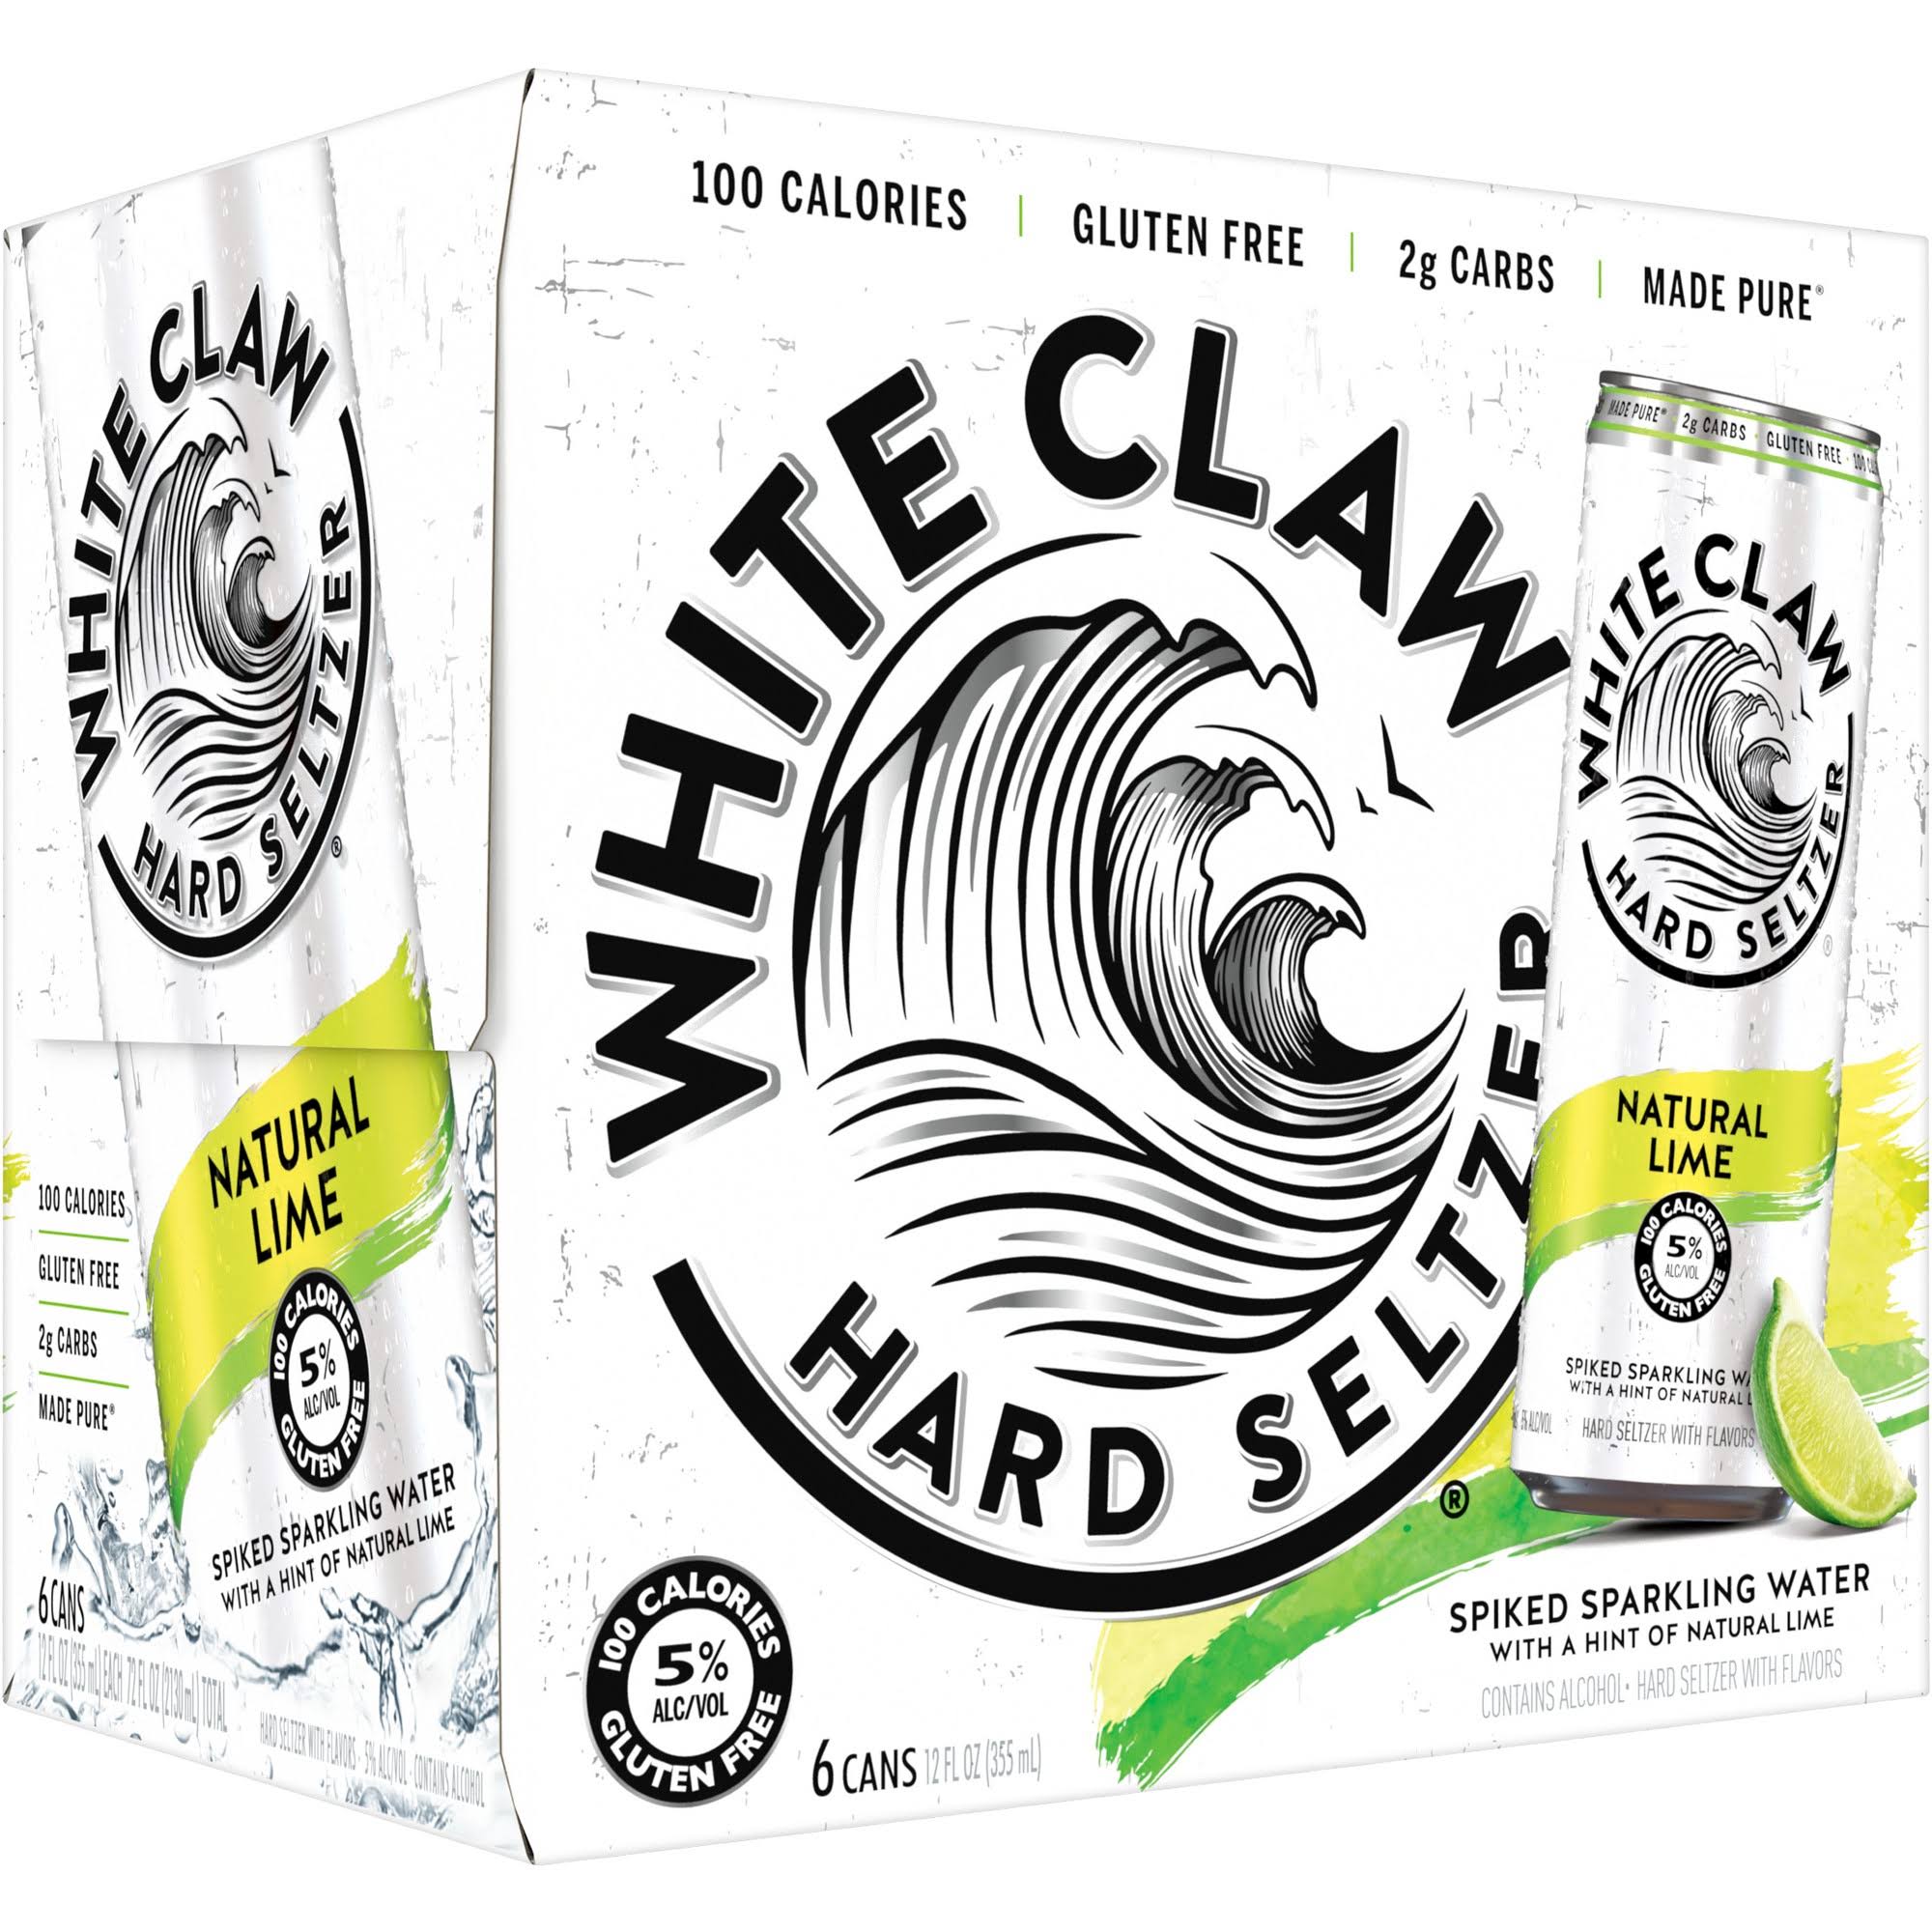 White Claw Hard Seltzer, Natural Lime - 6 cans, 12 fl oz